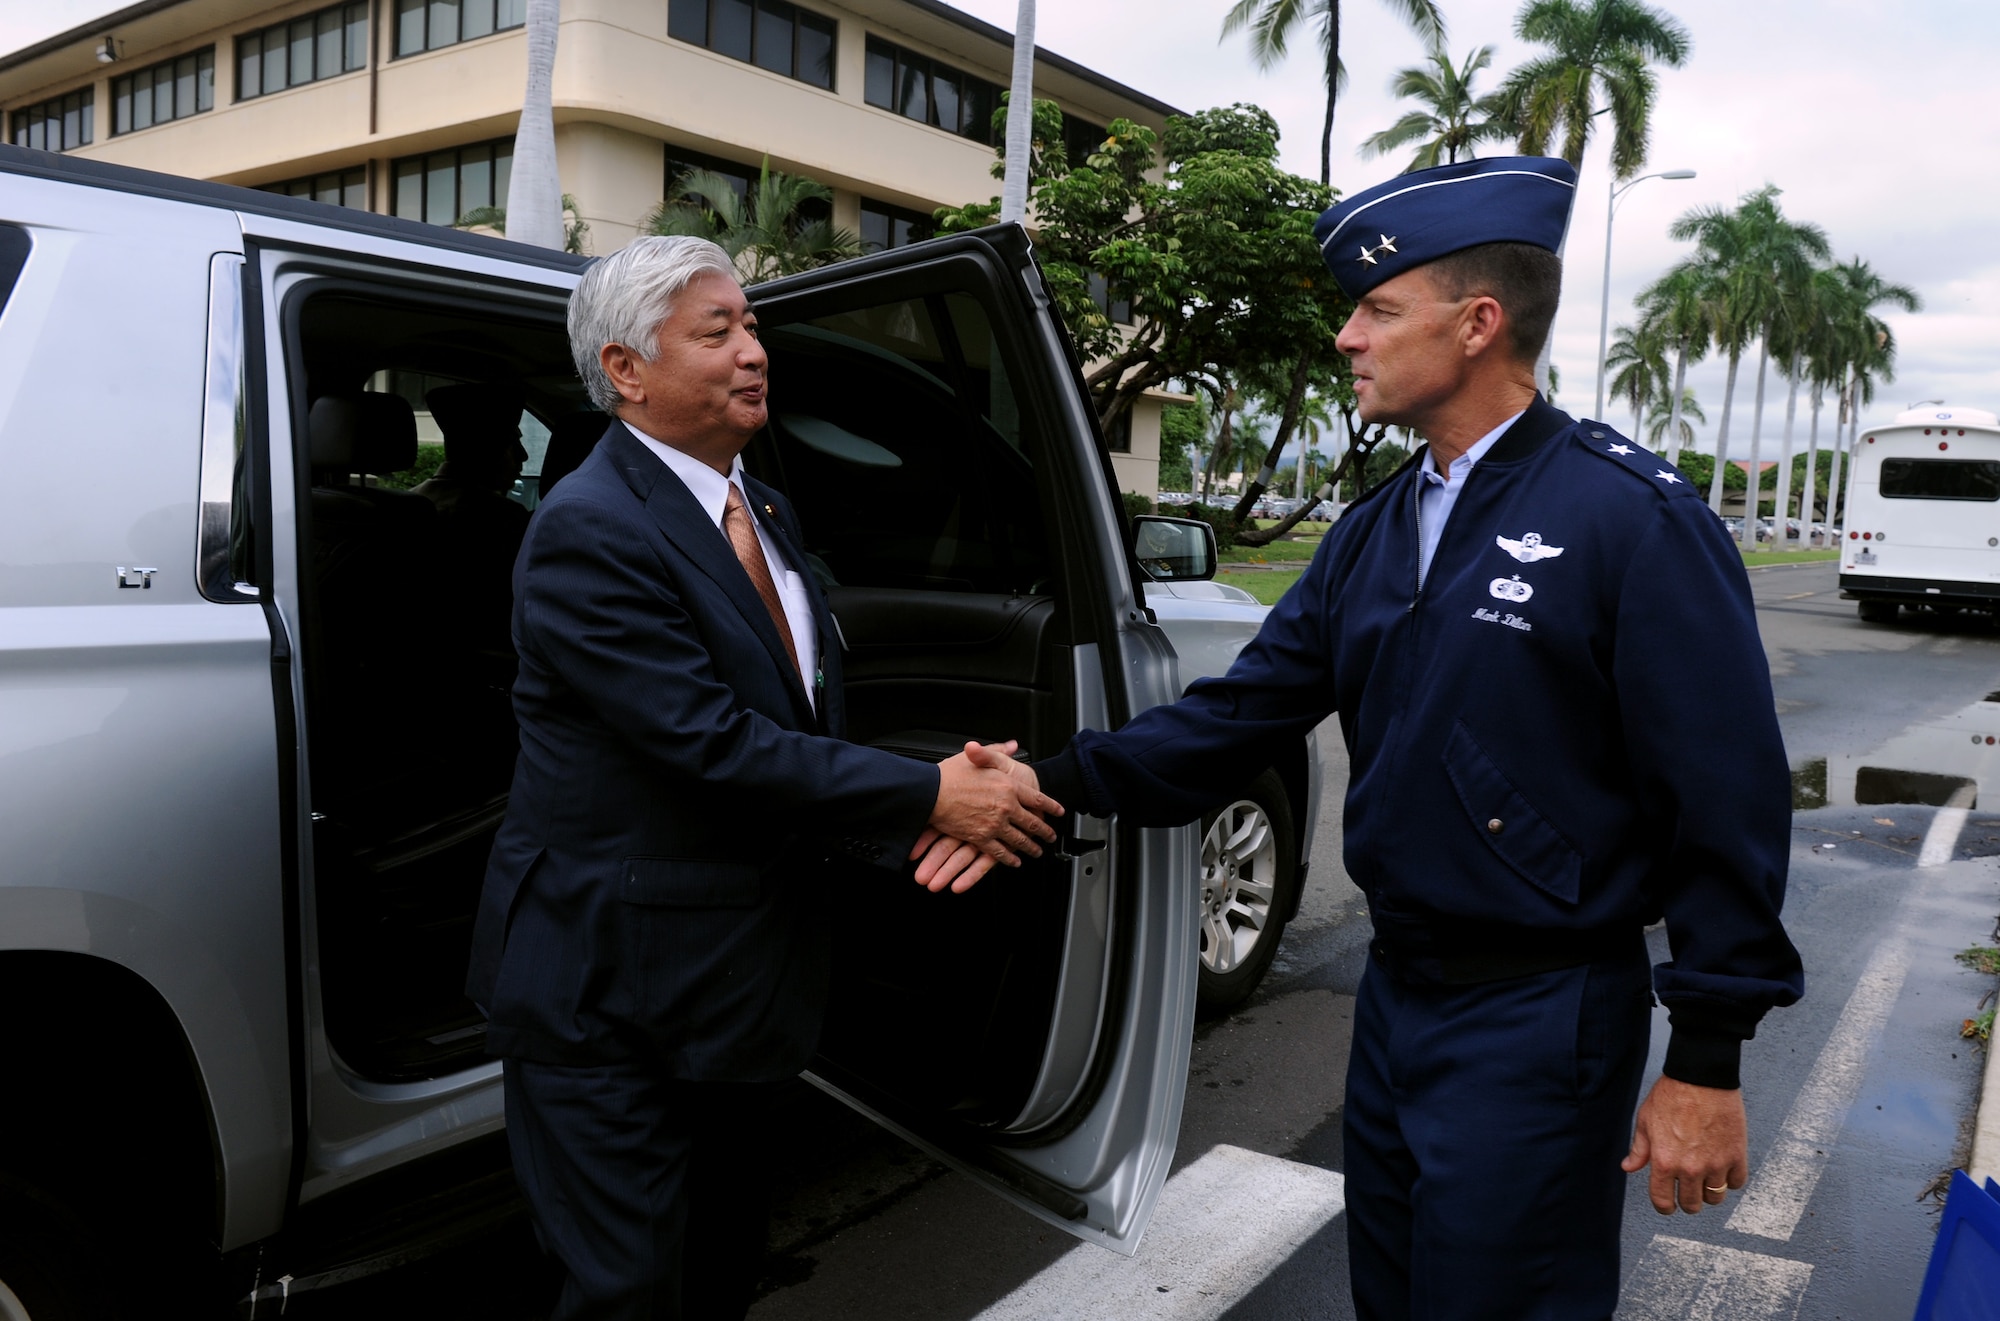 U.S. Air Force Maj. Gen. Mark Dillon, Pacific Air Forces vice commander, greets Japan Minister of Defense Gen Nakatani, during his visit to the 613th Air Operations Center Nov. 23, 2015, at Joint Base Pearl Harbor-Hickam, Hawaii. Nakatani and members of his defense forces were here to conduct bilateral talks with U.S. Pacific Command and PACAF about ongoing and future operations in the pacific. (U.S. Air Force photo by Staff Sgt. Alexander Martinez/Released)